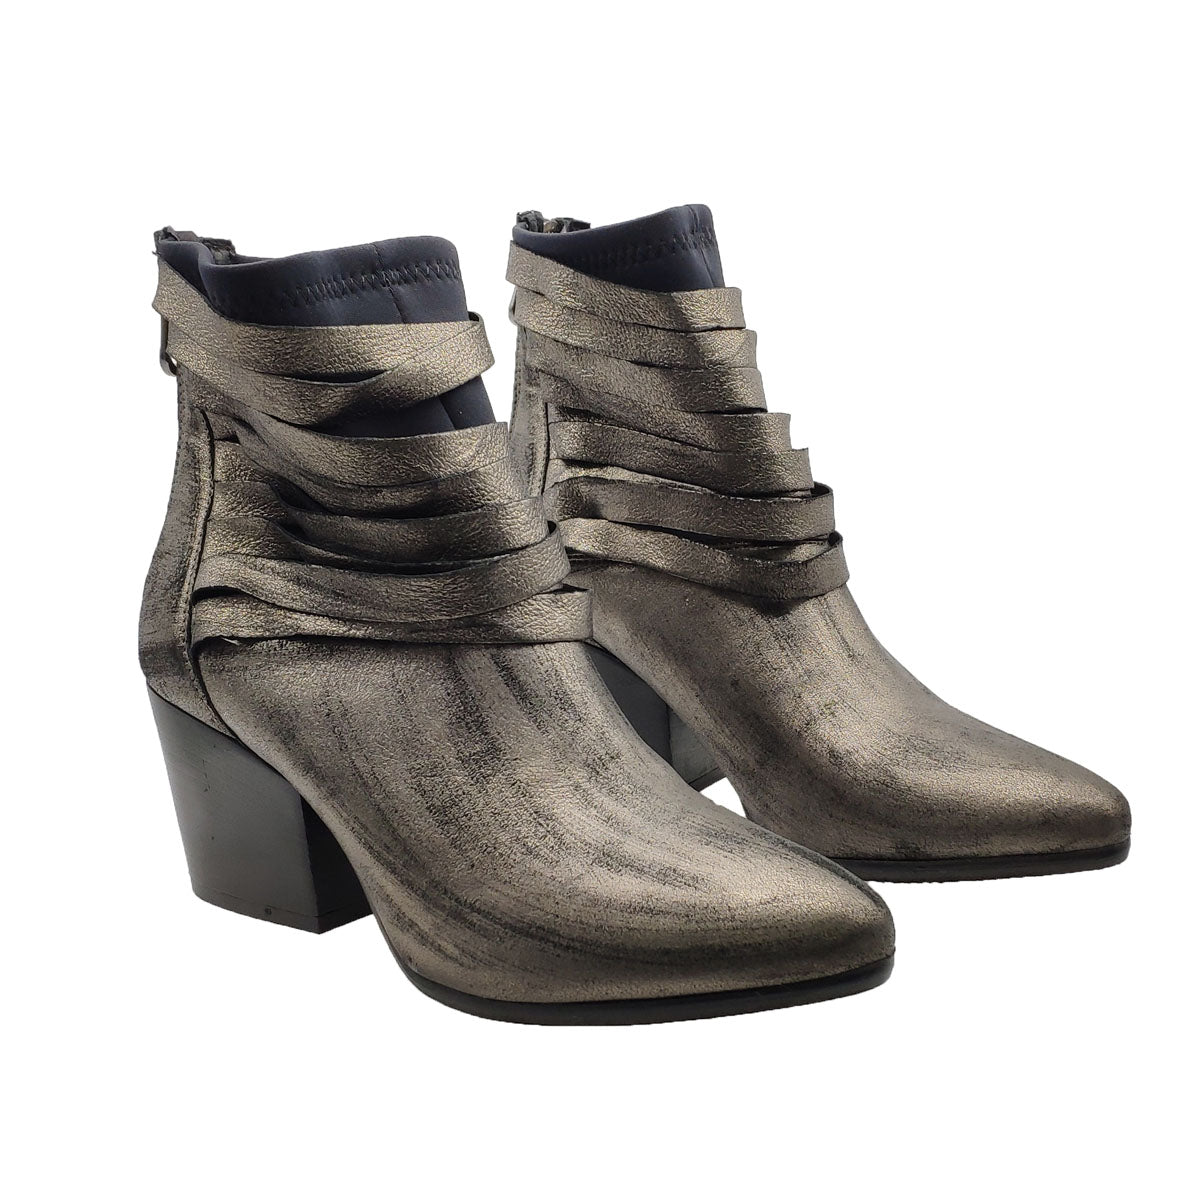 Women's Footwear Silver Laminated Leather Ankle Boots With Tone-On-Tone Cuts and Medium Heel